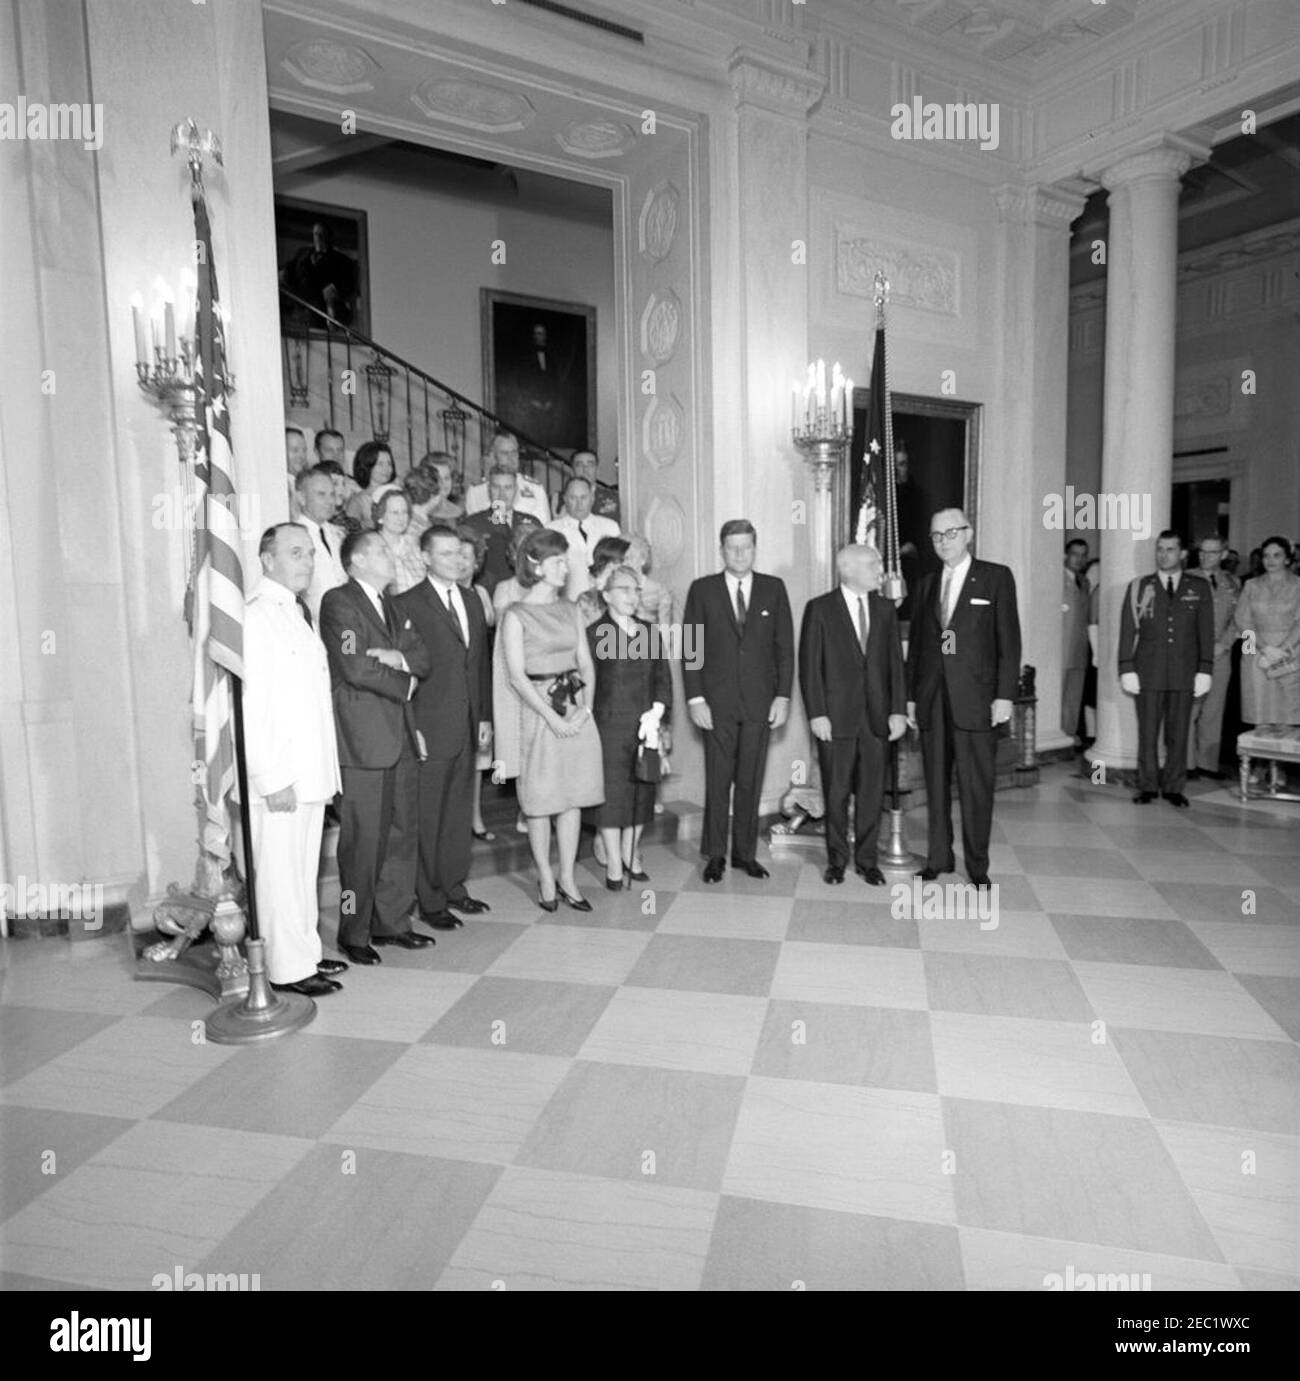 Military Reception at the White House, 6:00PM. President John F. Kennedy, First Lady Jacqueline Kennedy, and others attend a military reception at the White House. Also pictured (standing at grand staircase): Chairman of the Joint Chiefs of Staff, General Lyman L. Lemnitzer, and his wife, Katherine Lemnitzer; Secretary of the Army, Elvis J. Stahr, Jr., and his wife, Dorothy Stahr; Secretary of Defense, Robert S. McNamara; Secretary of the Air Force, Eugene M. Zuckert, and his wife, Barbara Jackman Zuckert; Secretary of the Navy, Fred Korth, and his wife, Vera Korth; General Maxwell D. Taylor a Stock Photo